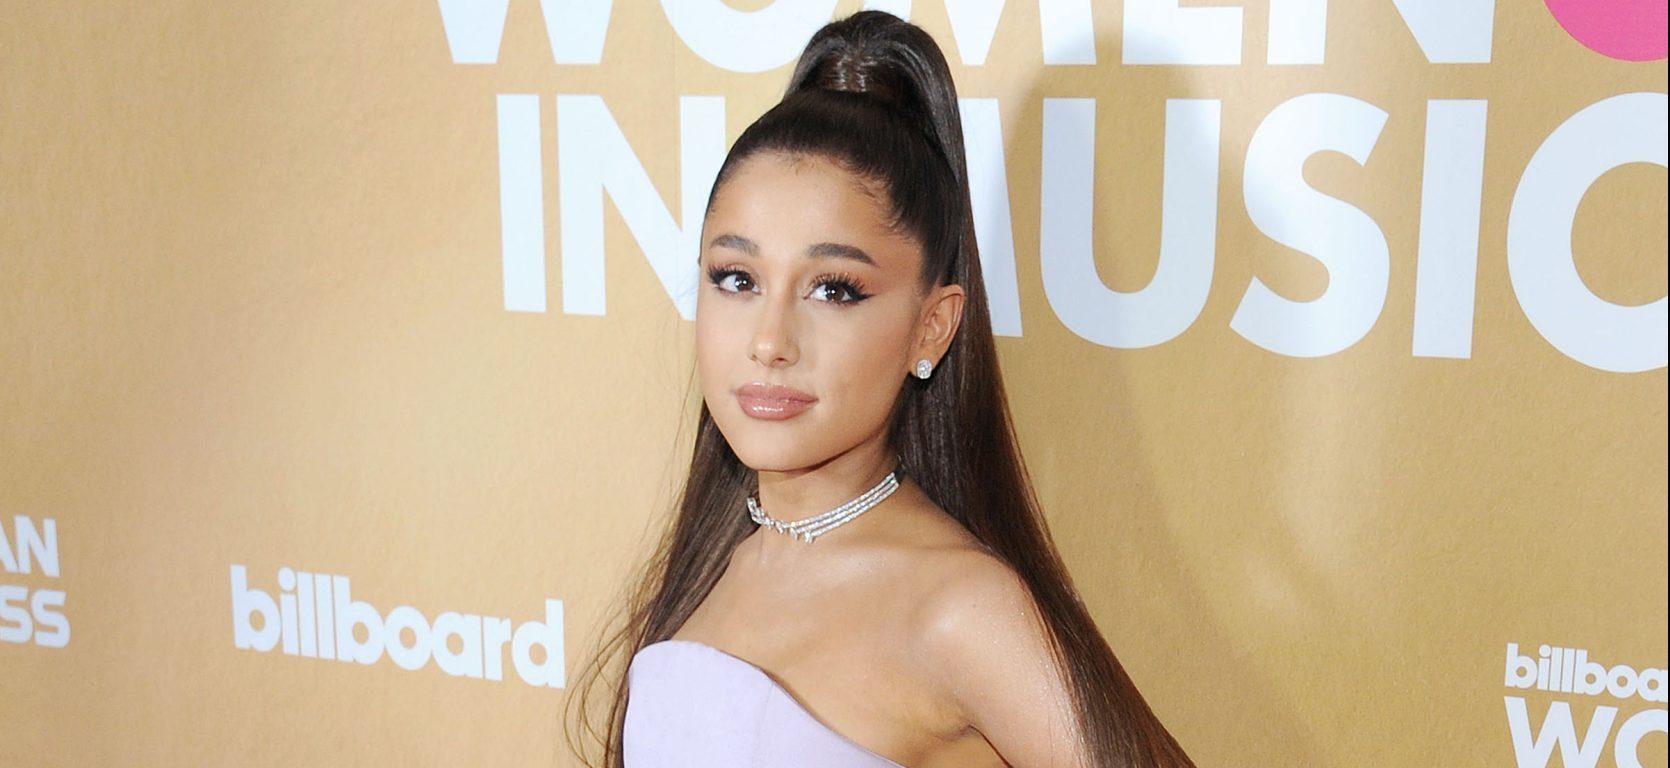 Ariana Grande Gets Emotional As ‘Wicked’ Crew Is Halfway With Filming: ‘Don’t Want It To End’